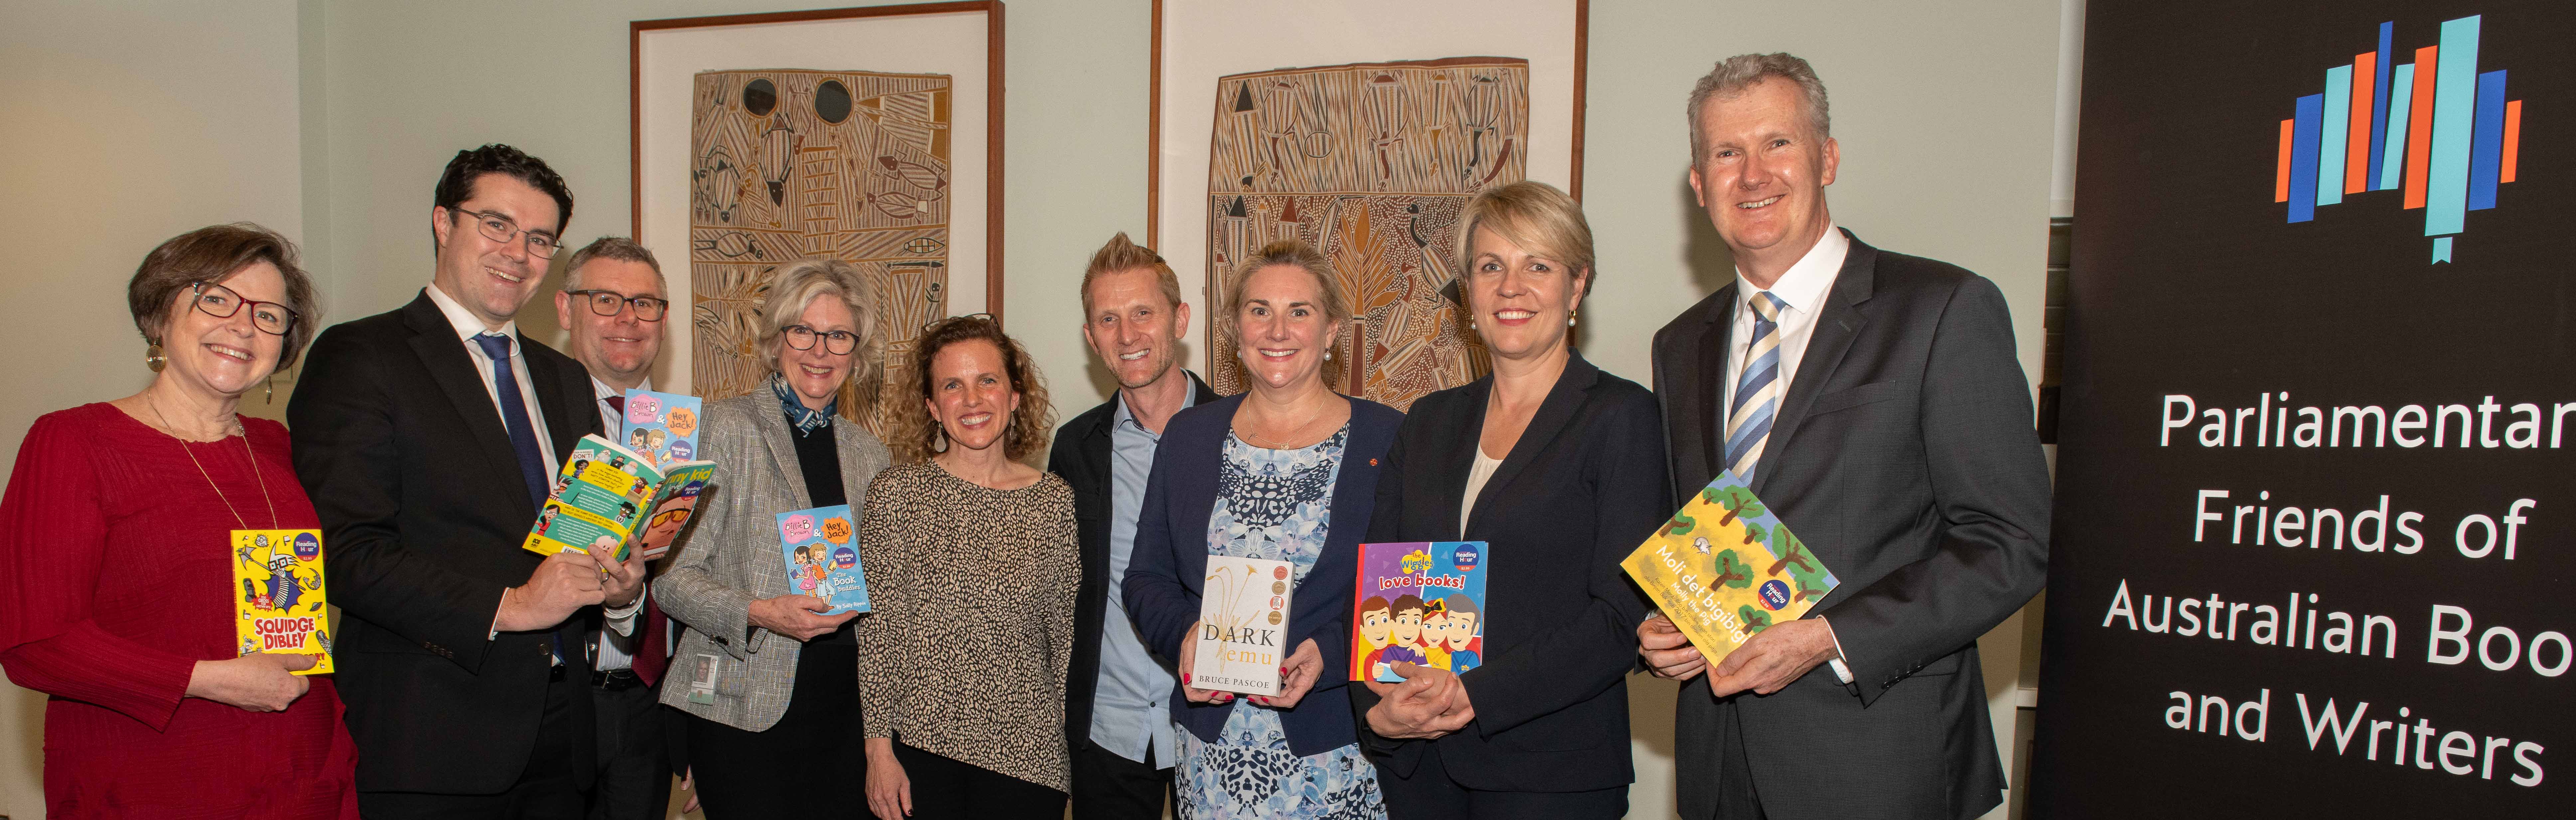 Politicians holding books by a Parliamentary Friends of Australian Books and Writers banner